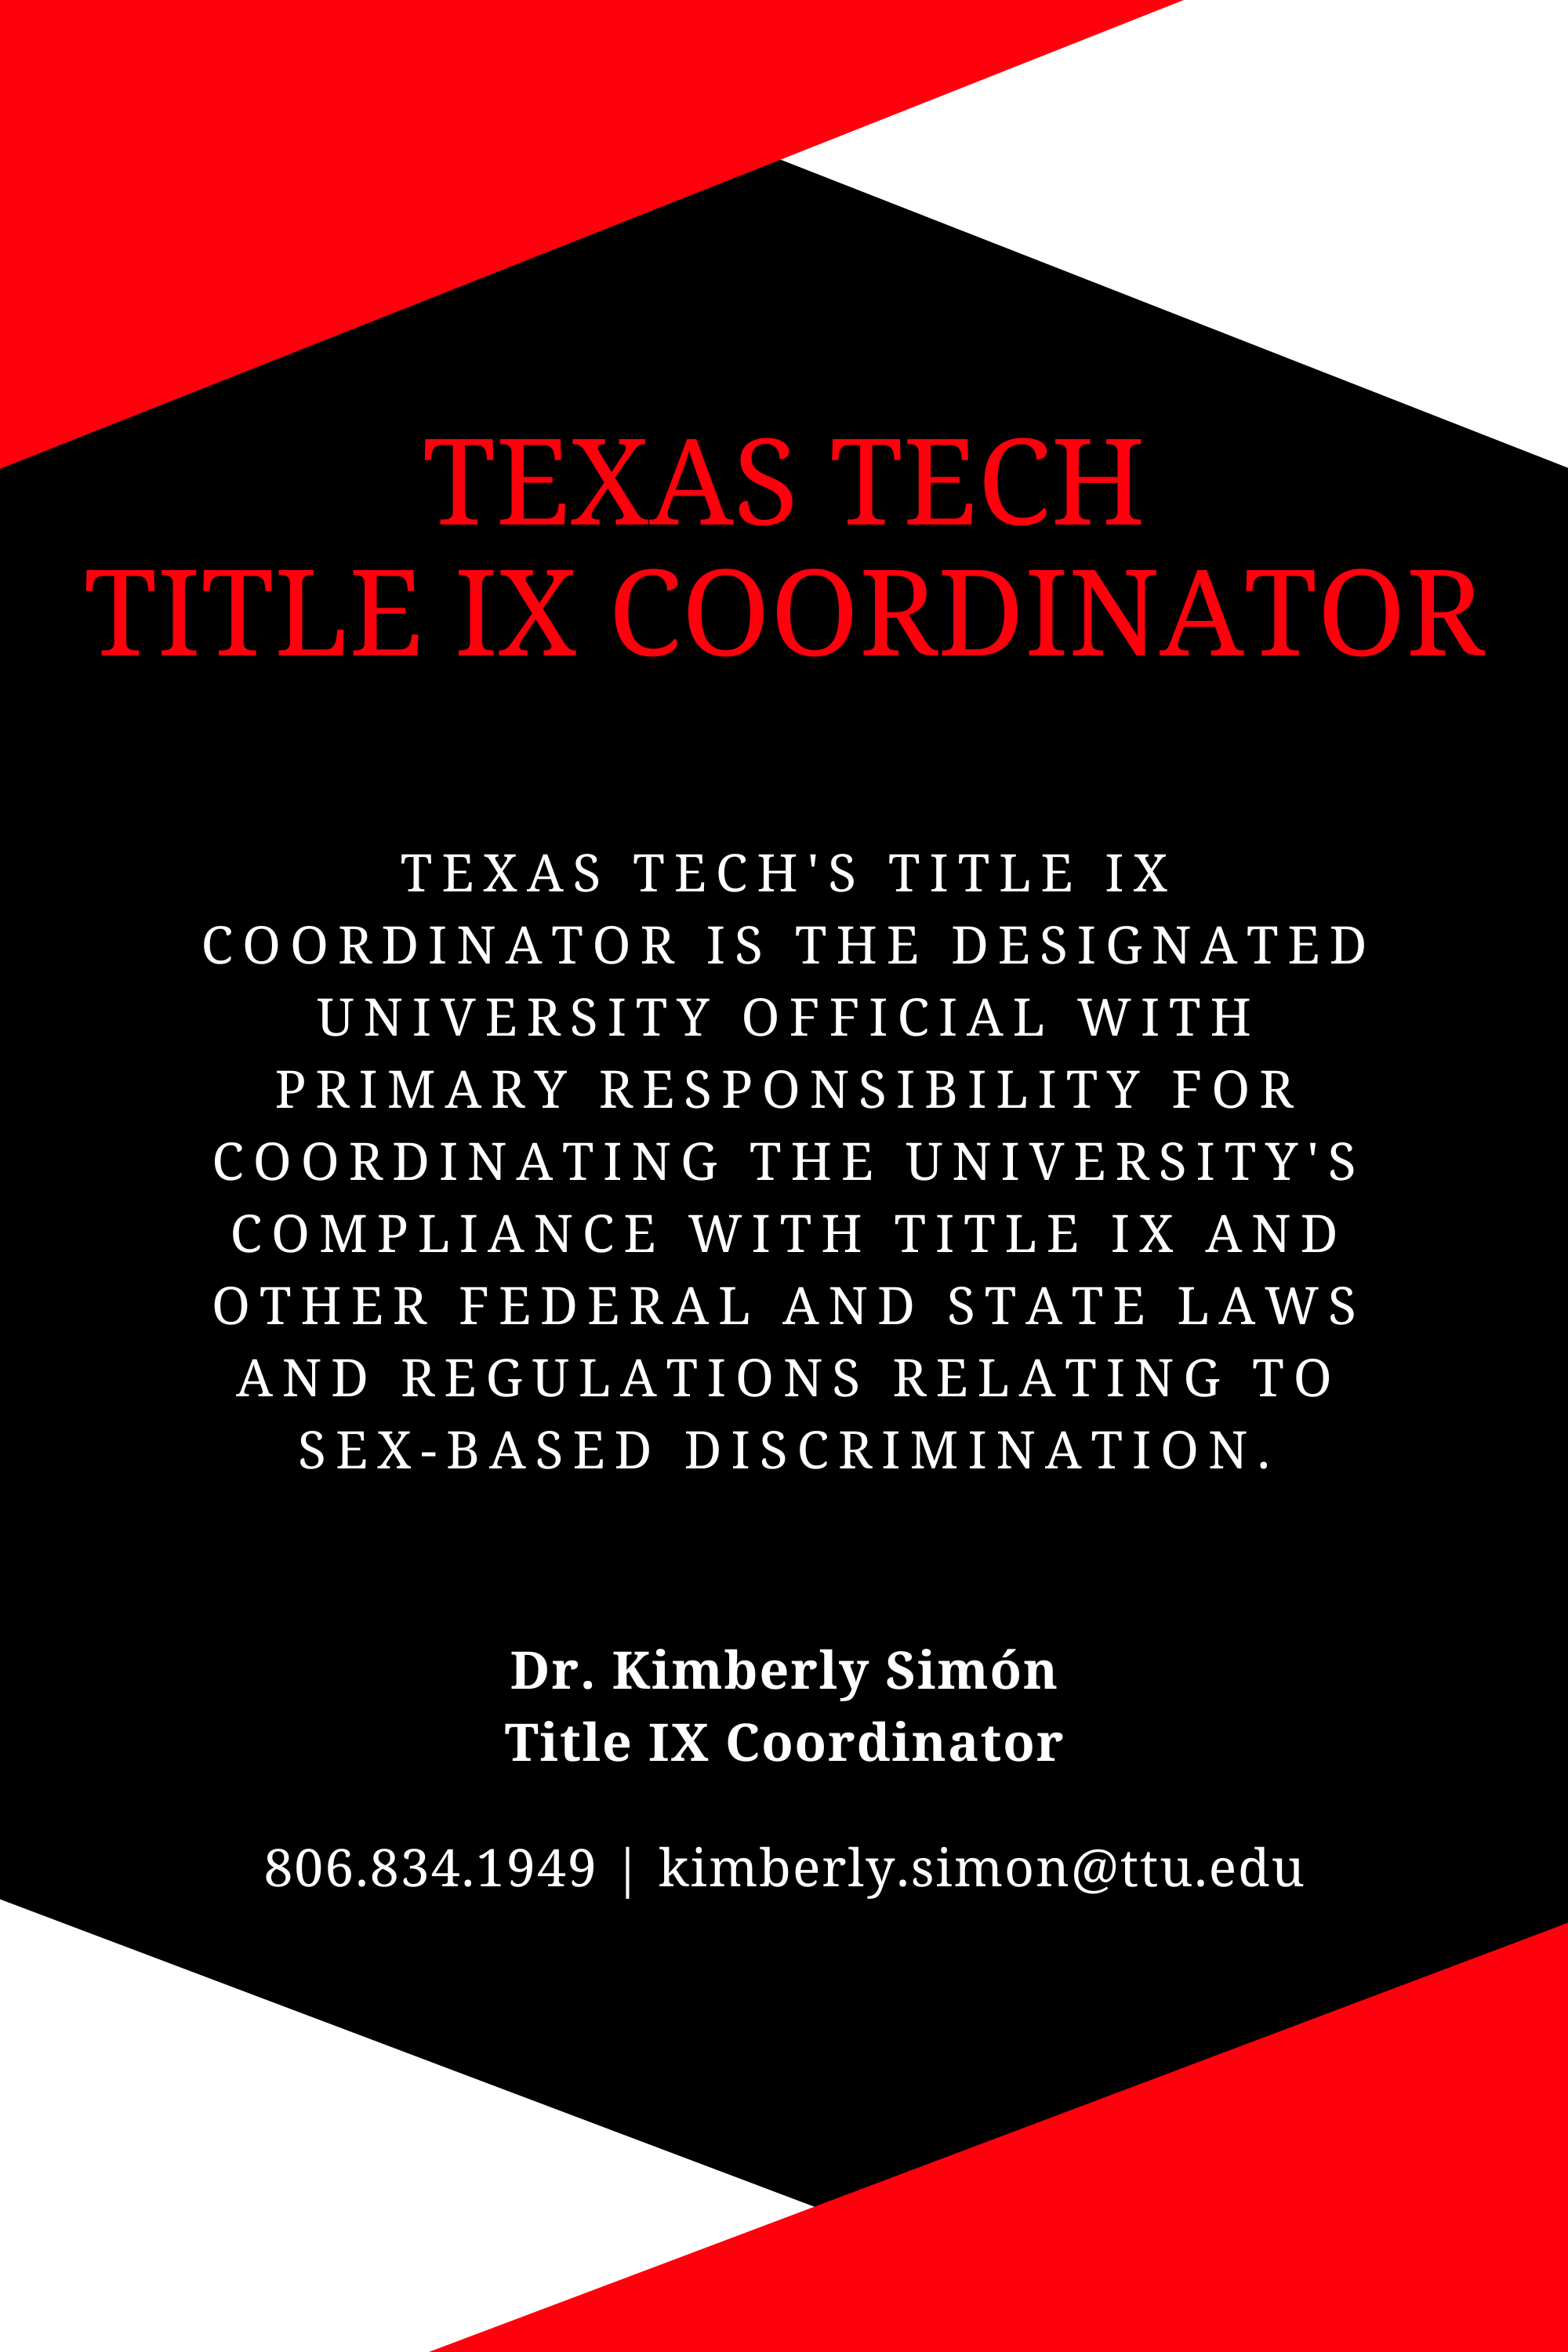 Texas Tech Title IX Coordinator Texas Tech's Title IX Coordinator is the designated university official with primary responsibility for coordinating the university's compliance with Title IX and other federal and state laws and regulations relating to sex-based discrimination. Dr. Kimberly Simón Title IX Coordinator 806.834.1949 kimberly.simon@ttu.edu